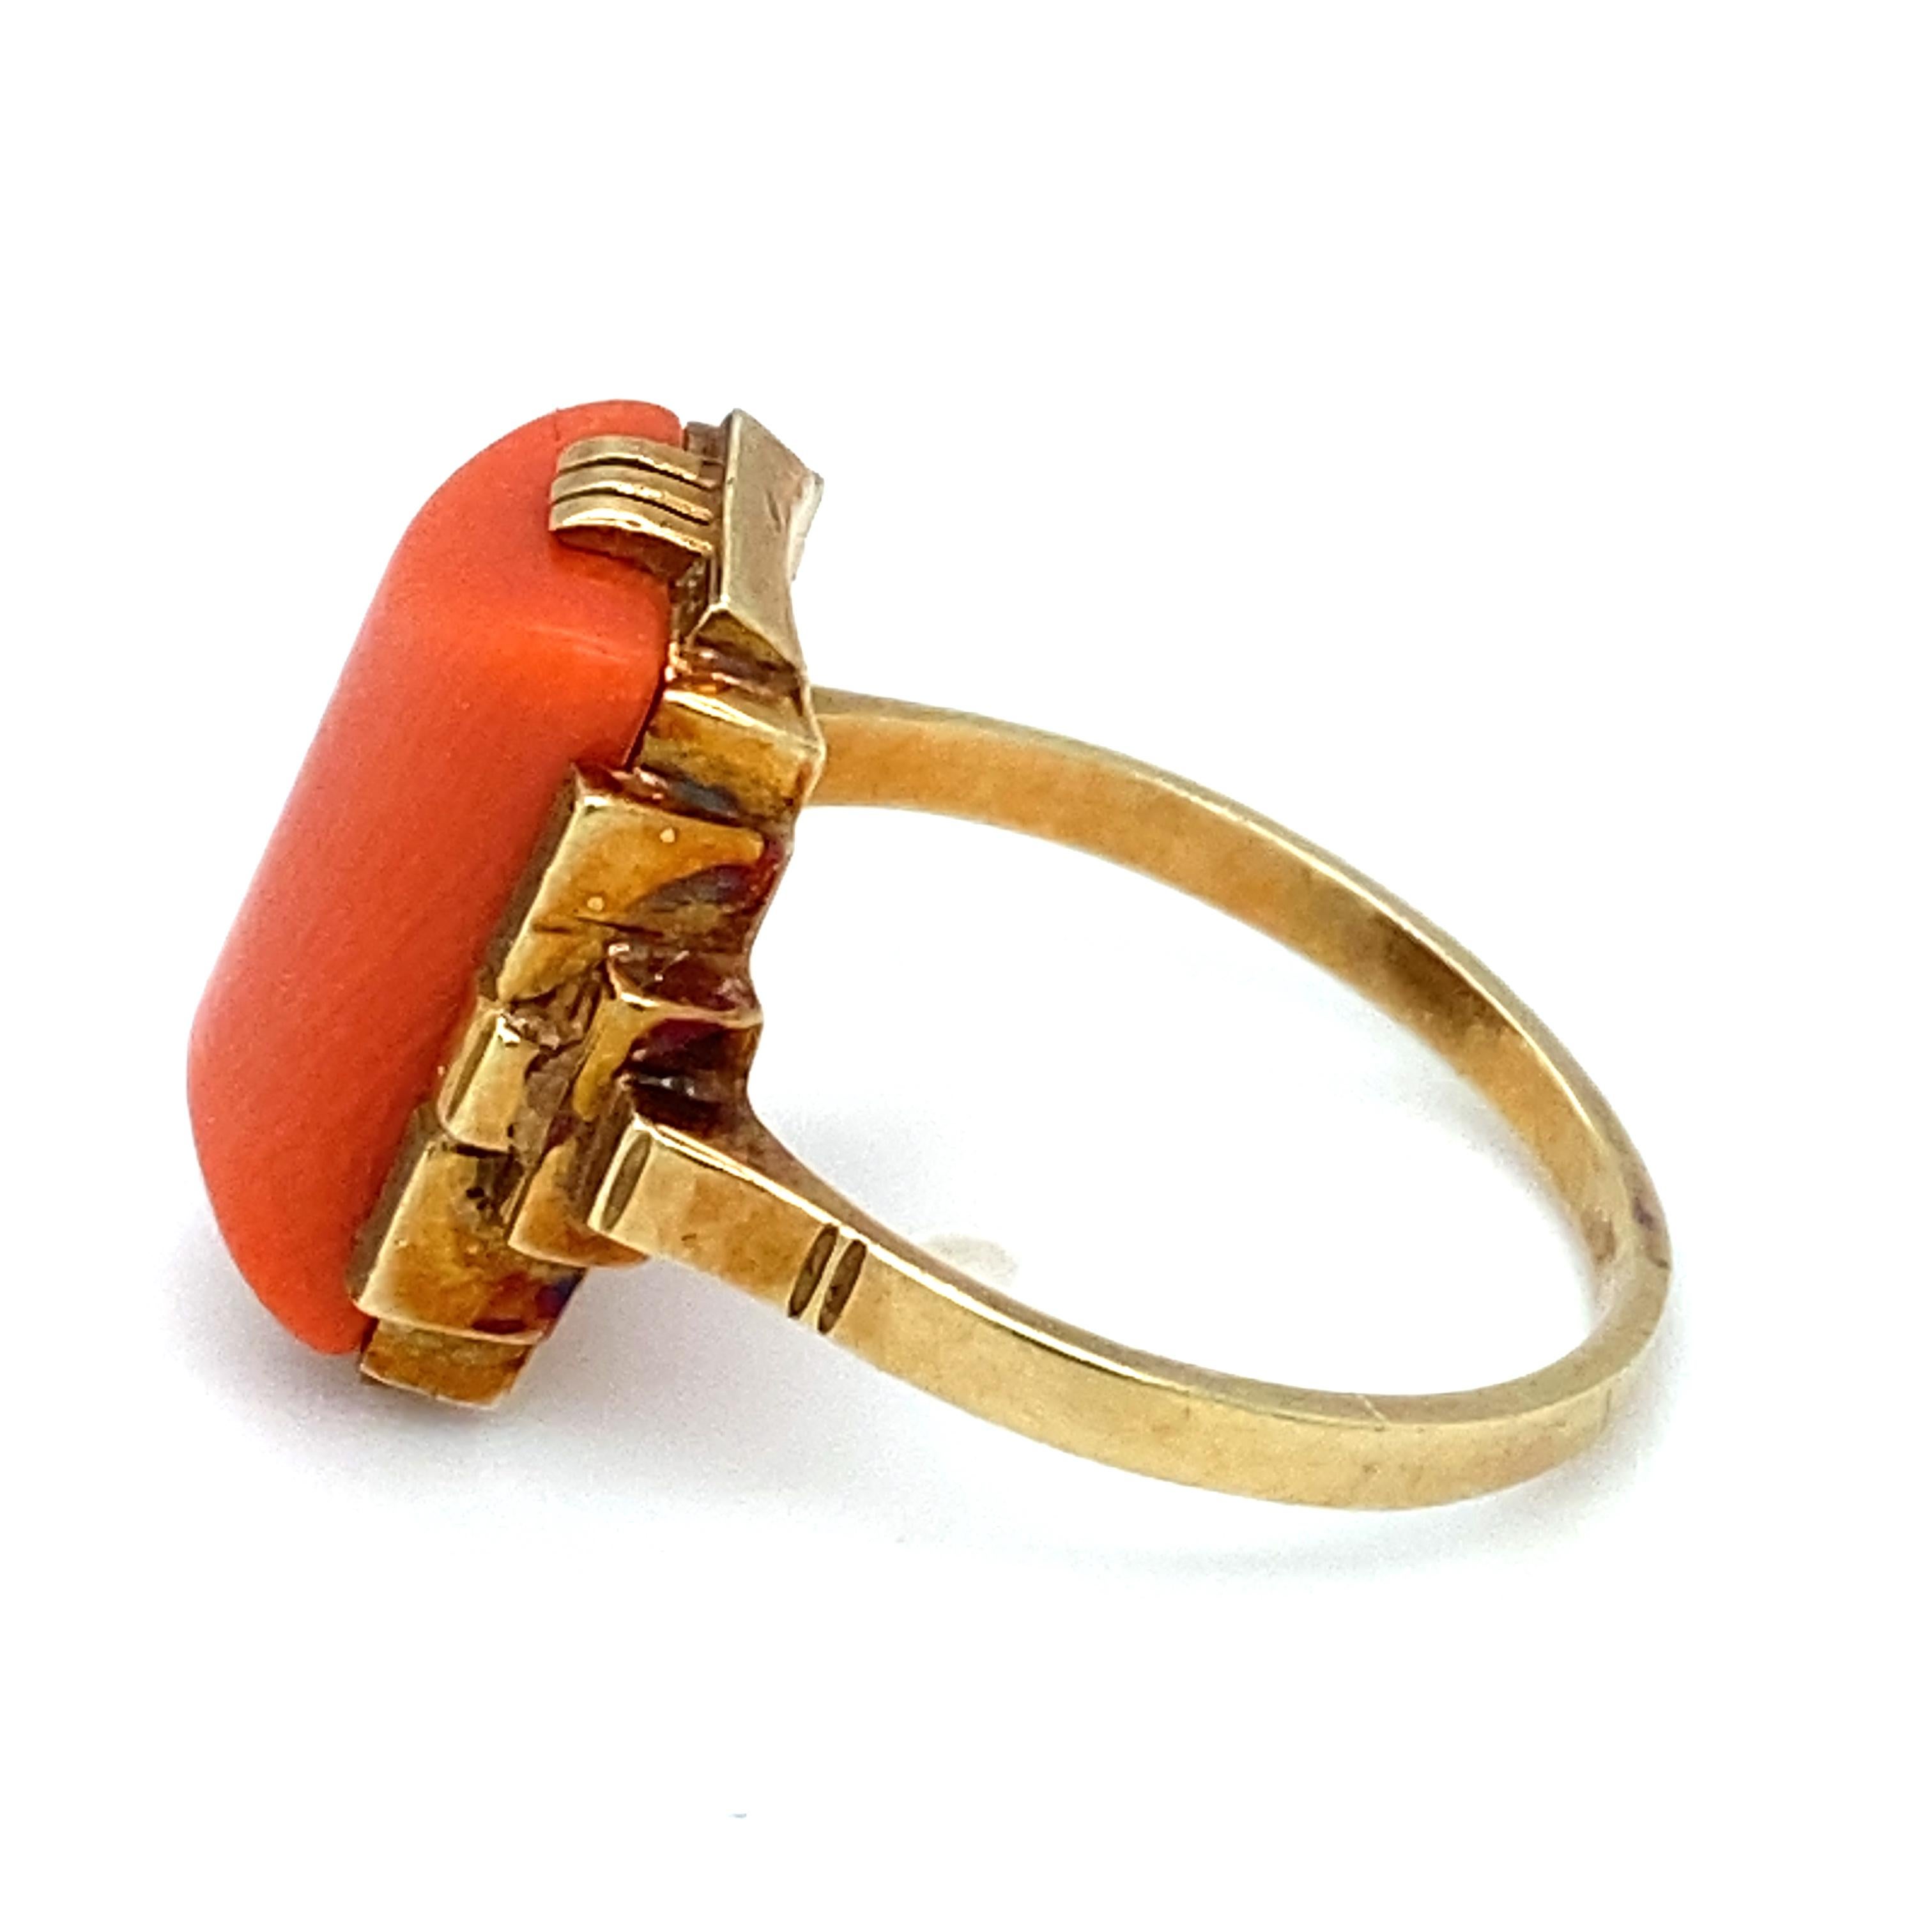 Cabochon Circa 1940s Art Deco Style Rectangular Coral Ring in 14 Karat Yellow Gold For Sale